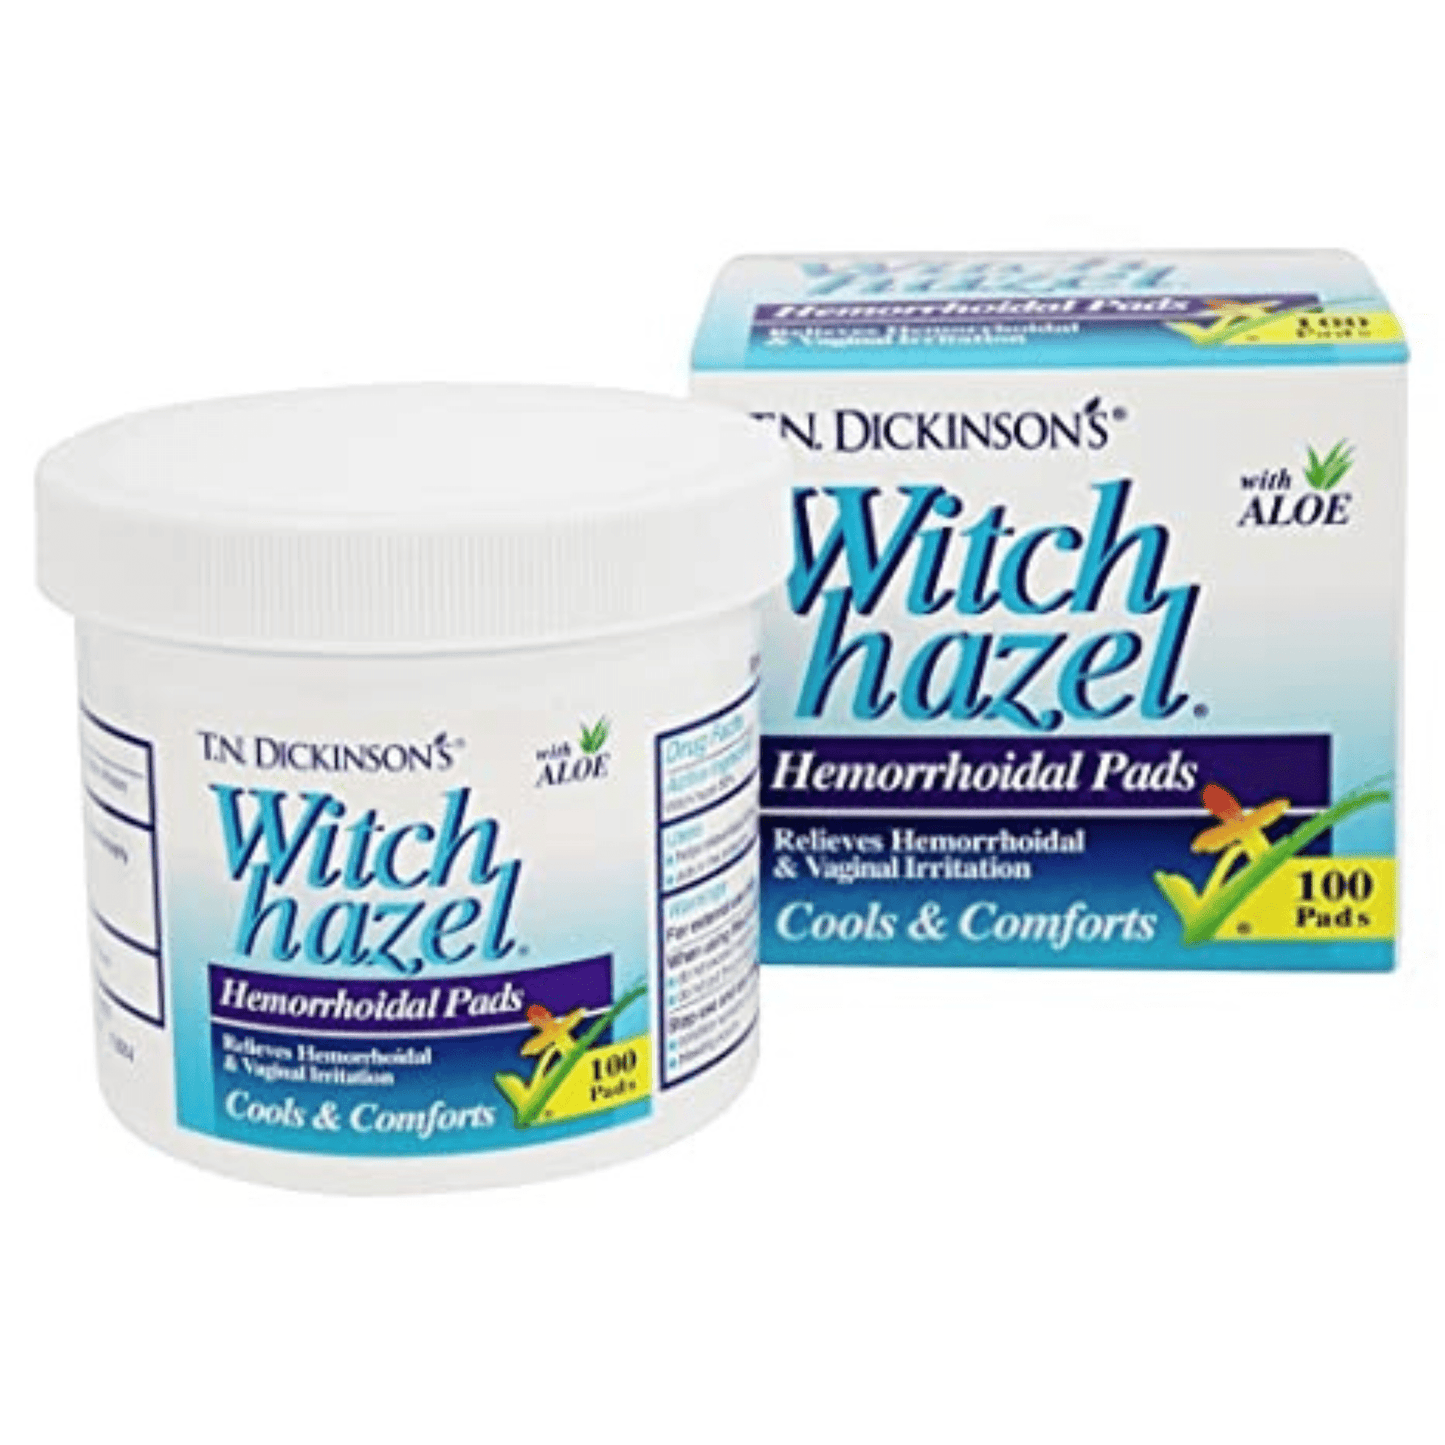 Primary Image of Witch Hazel Hemorrhoidal Pads